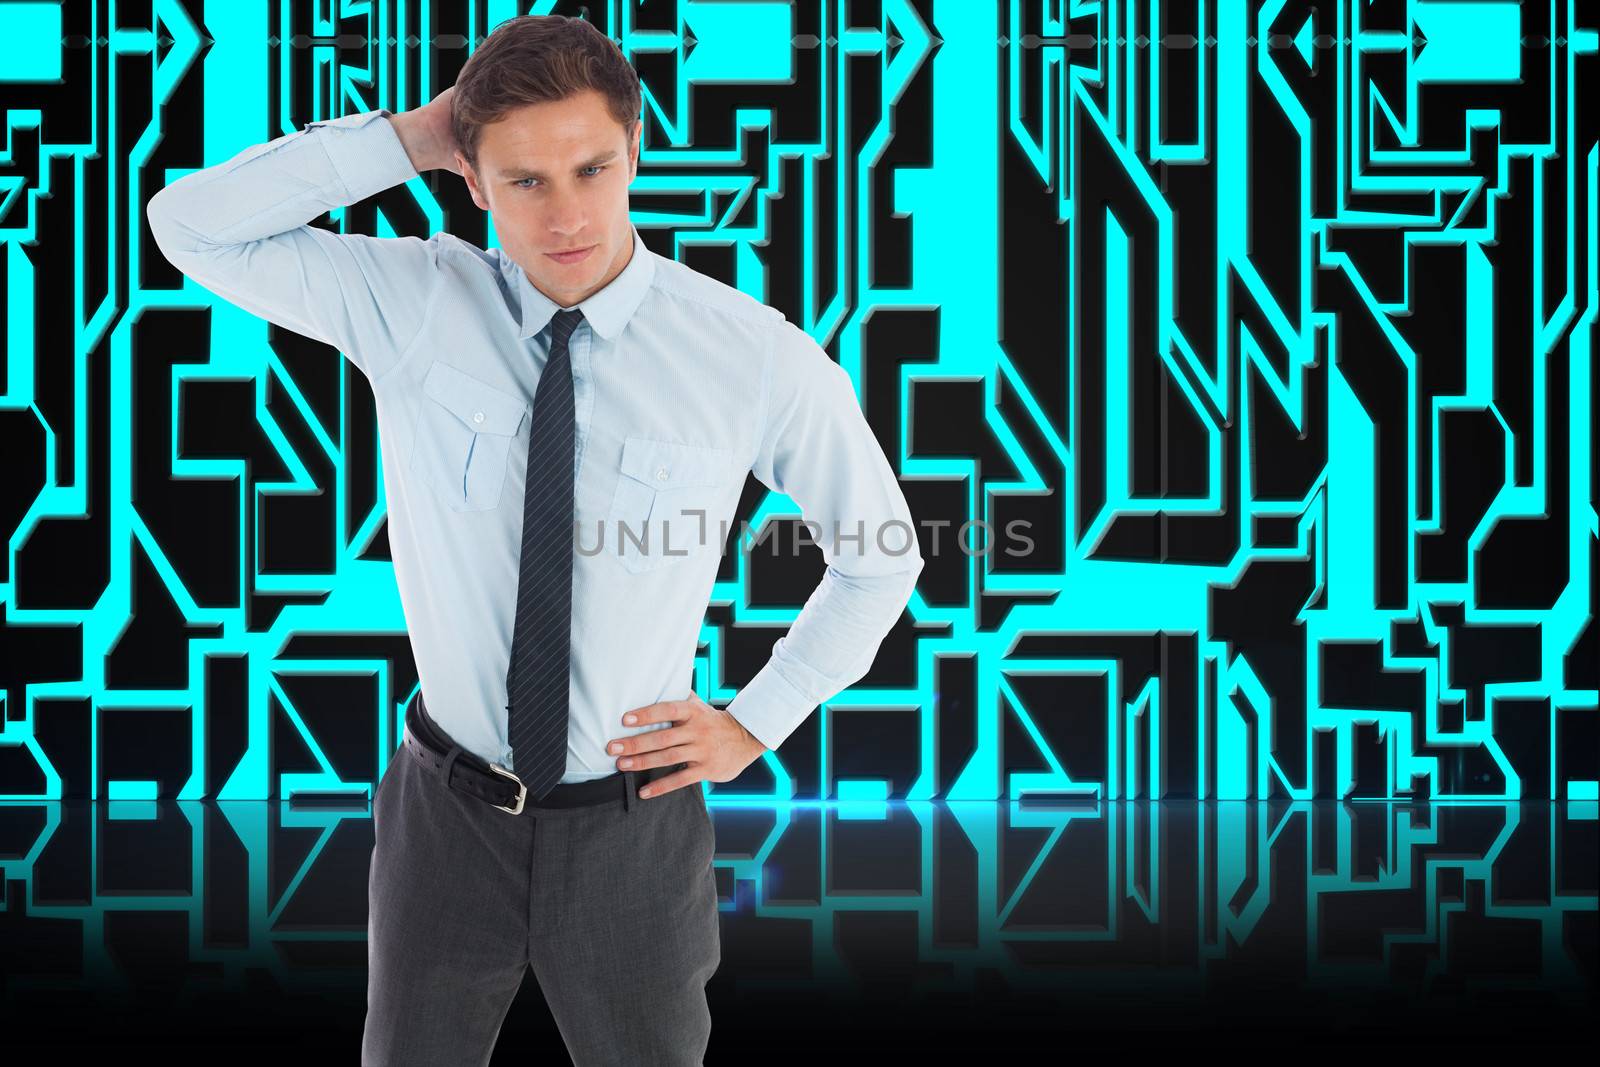 Thinking businessman scratching head against abstract technology background